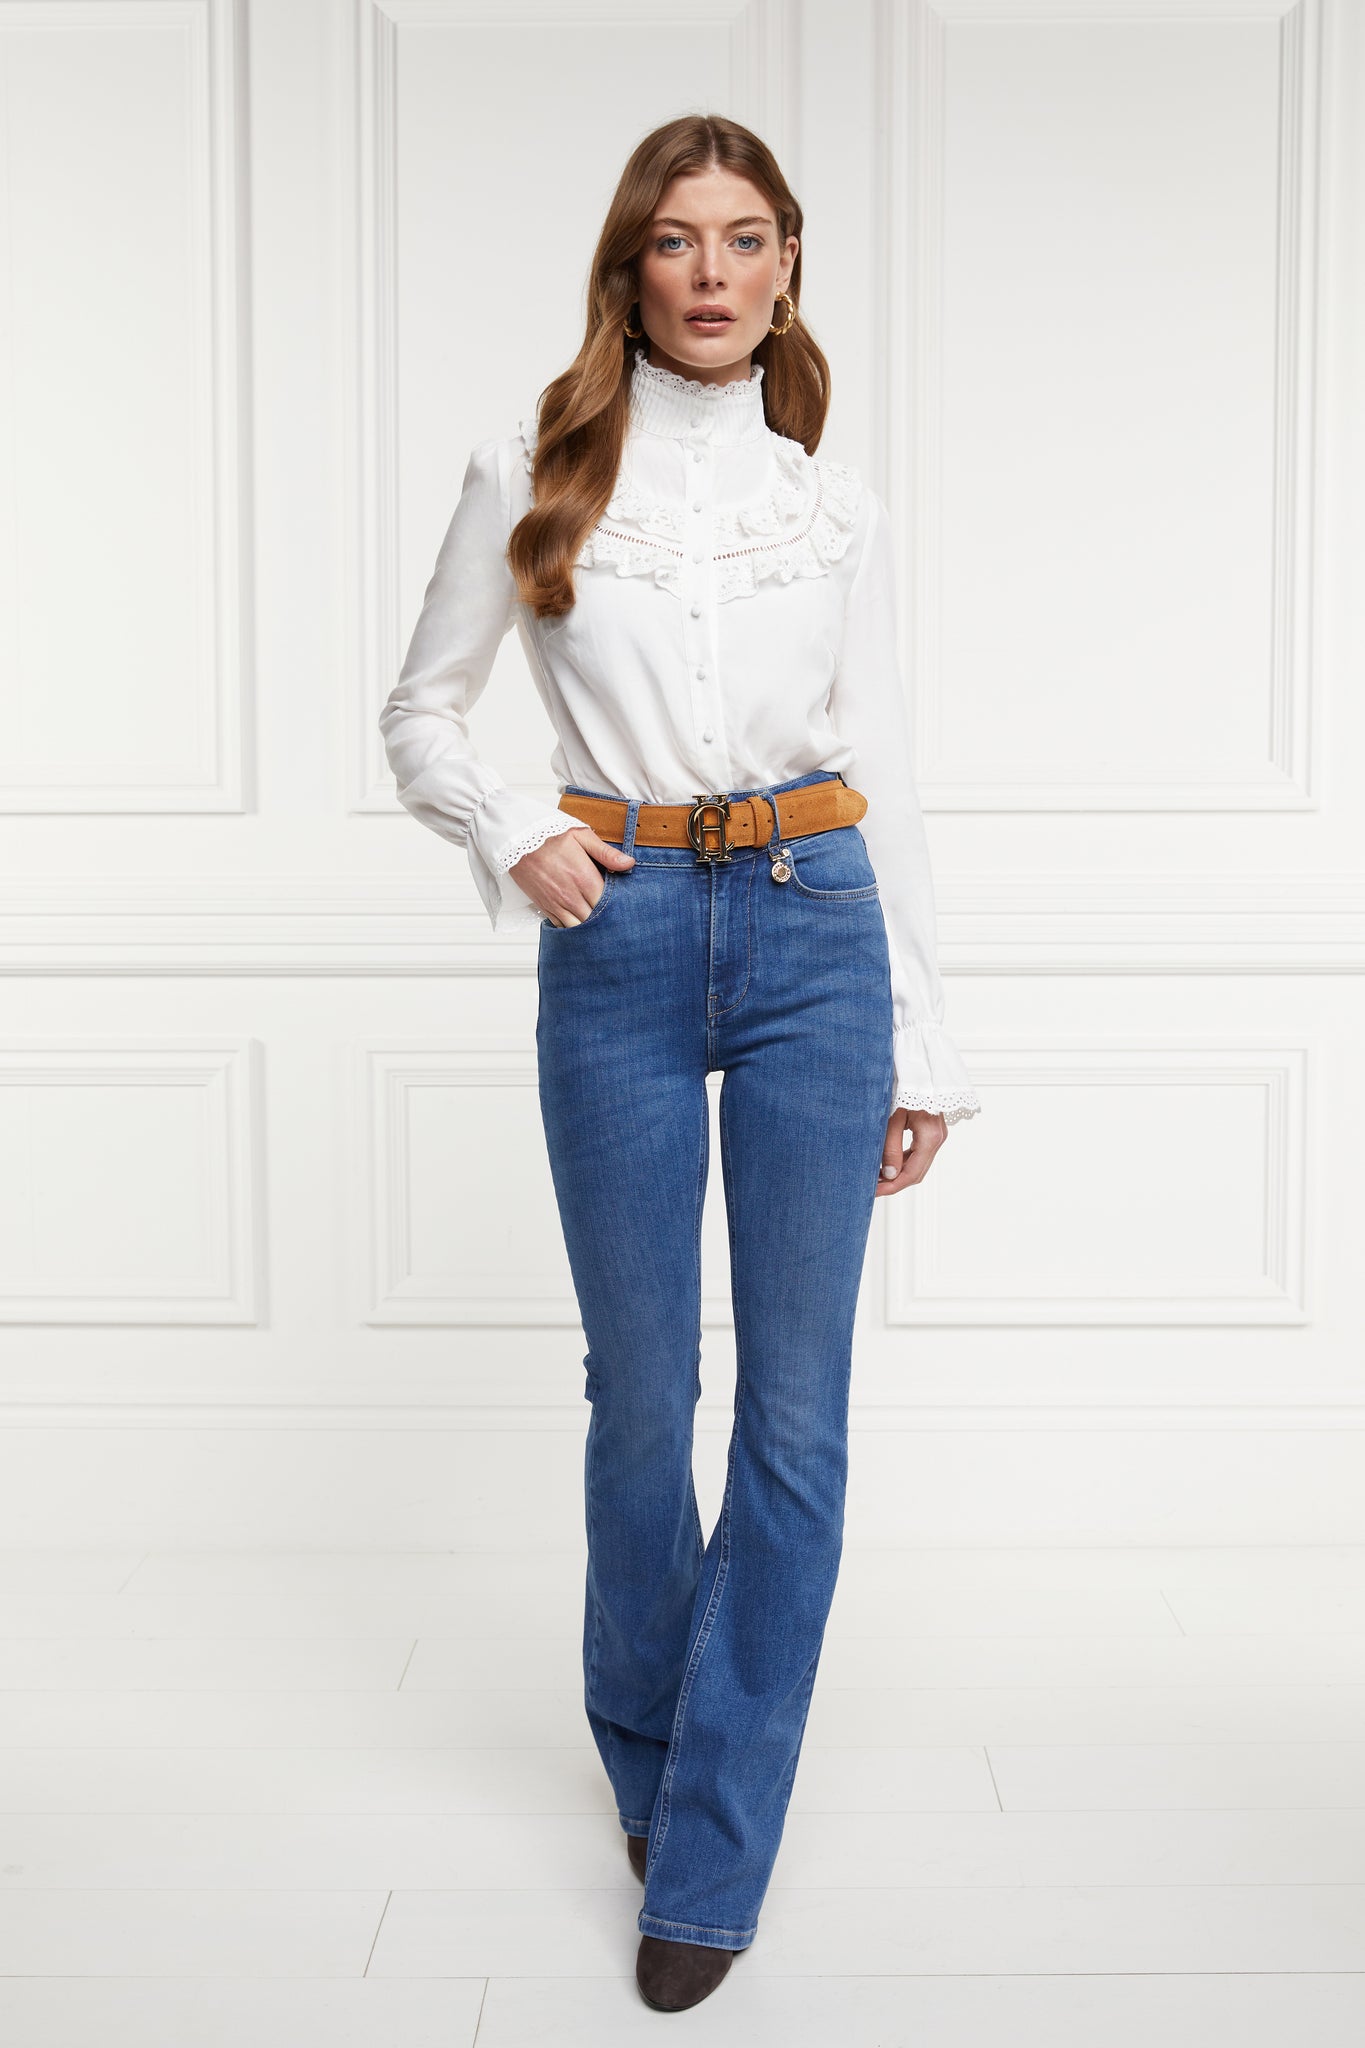 White blouse with long sleeves and a slim fit with delicate lace trim to both the collar and cuff edges with flattering lace details to the front body